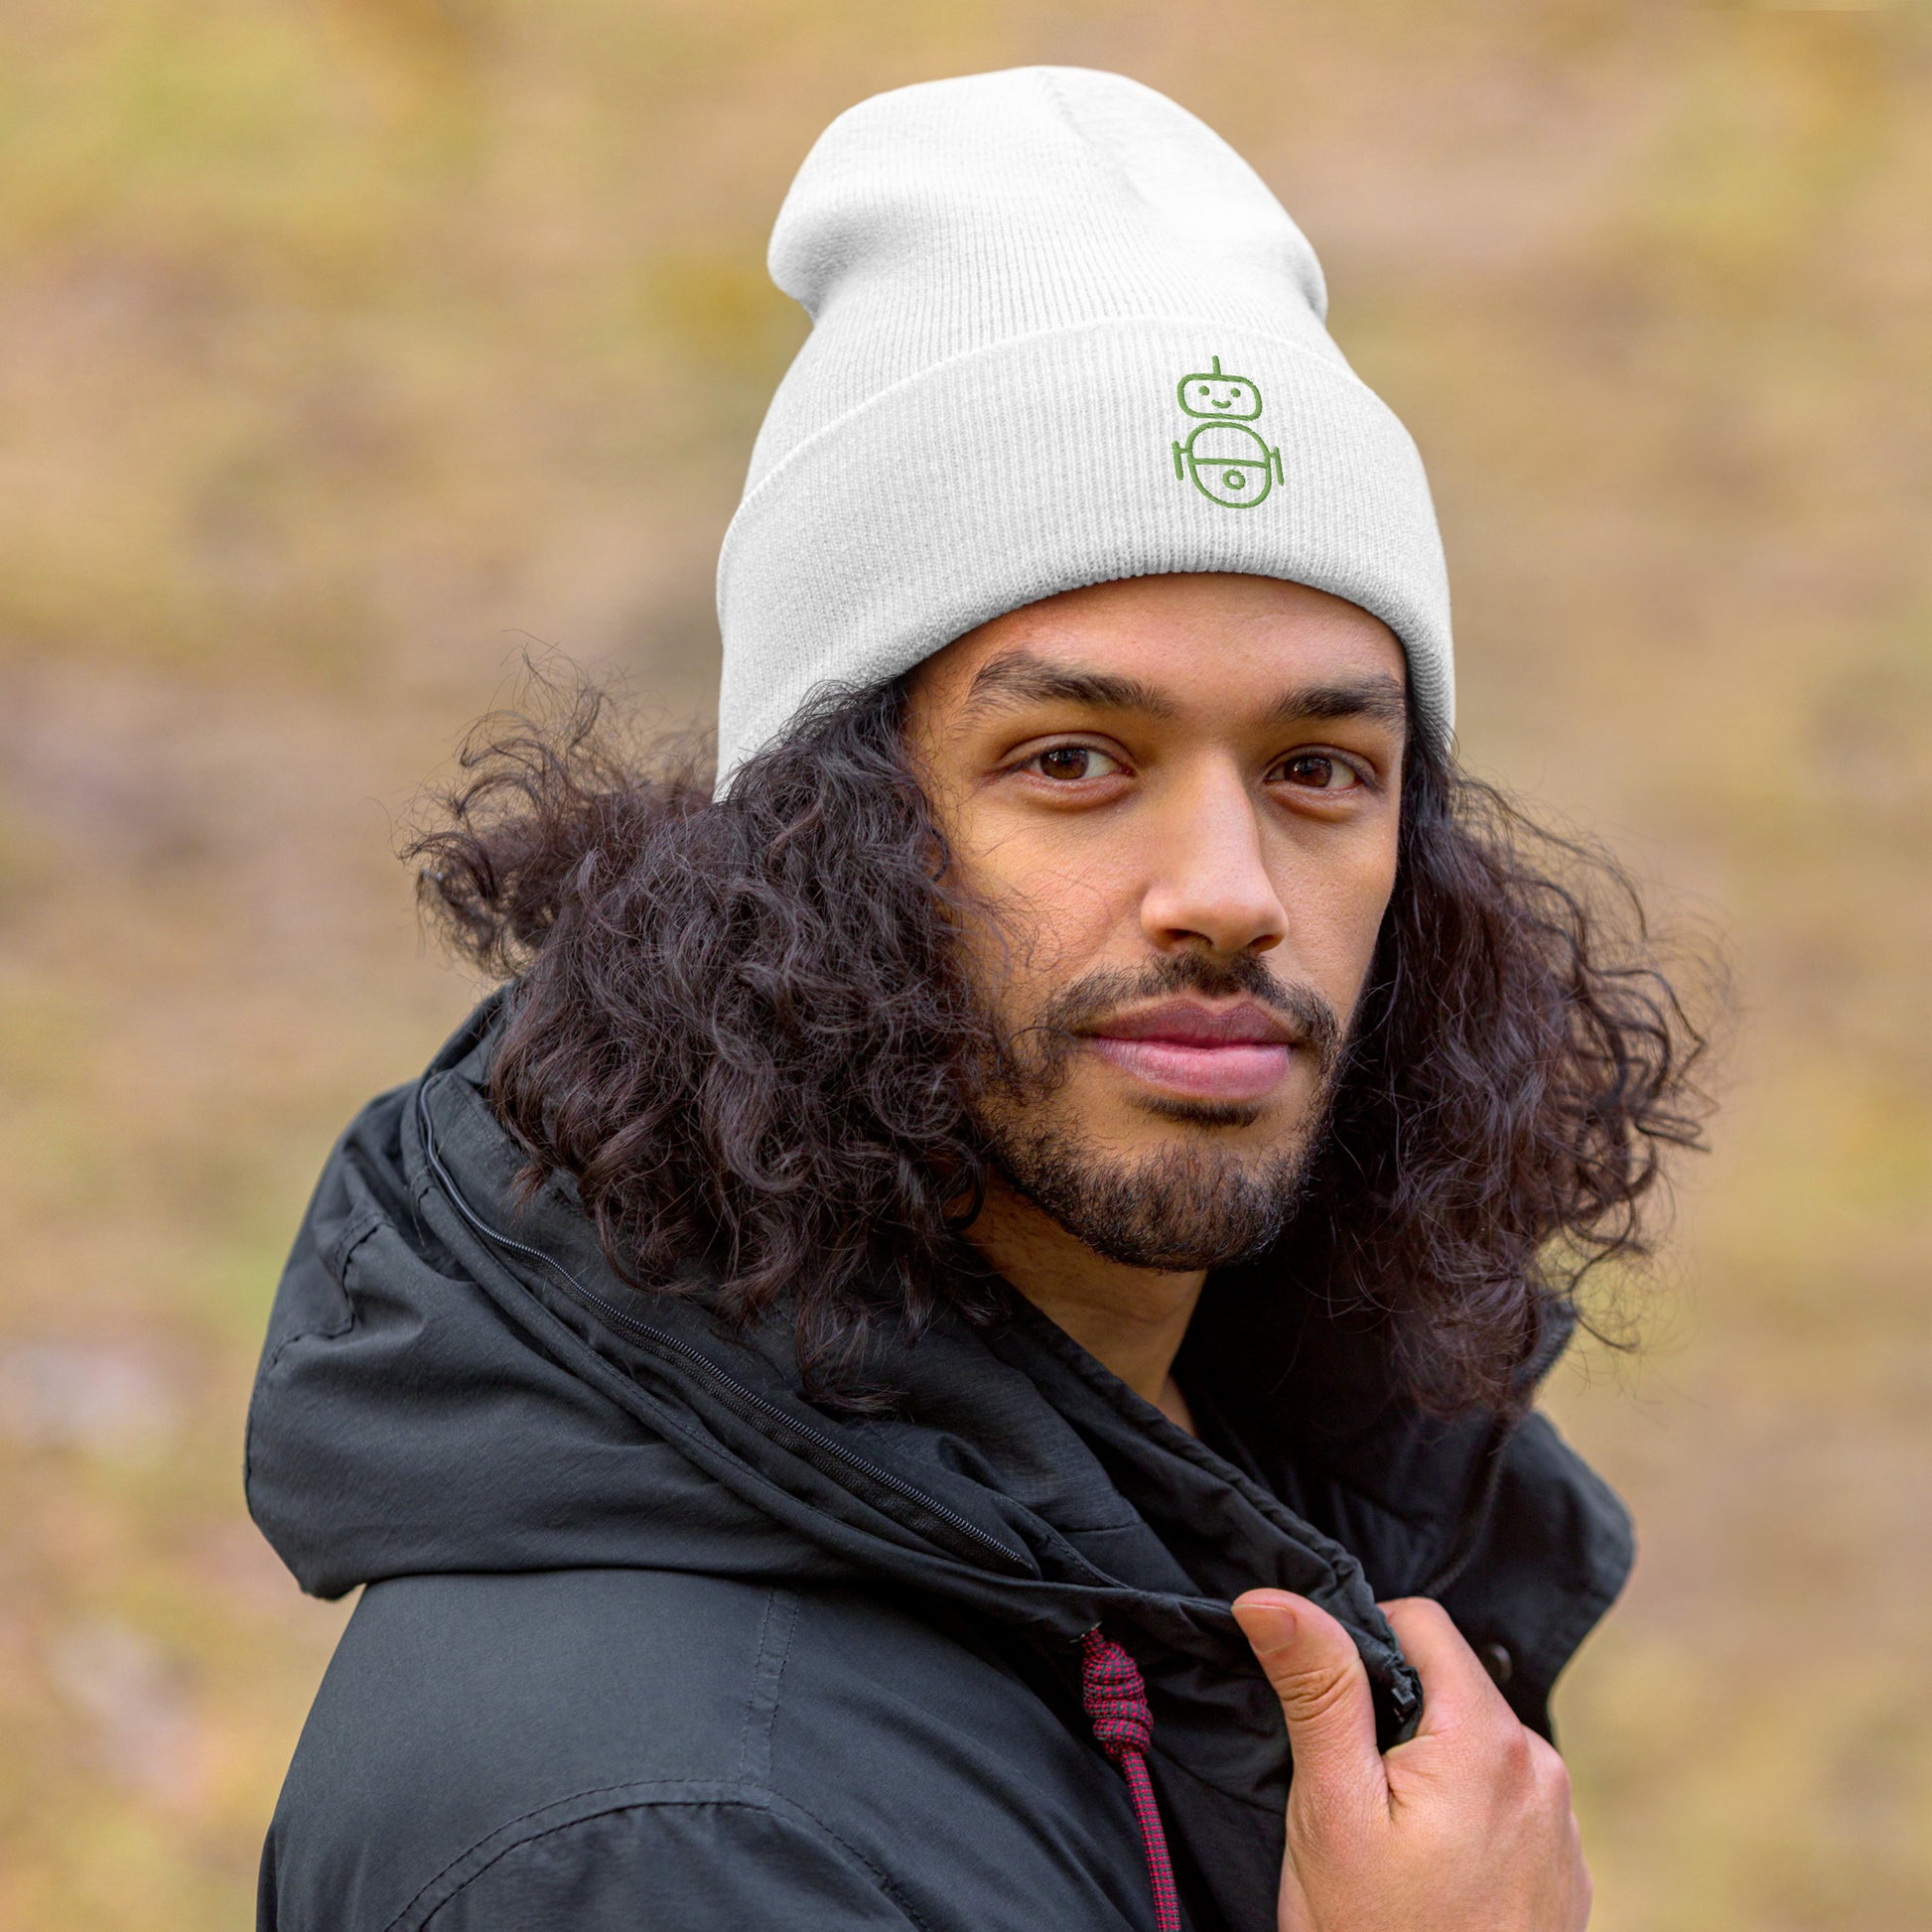 Men with white beanie and Android logo in green